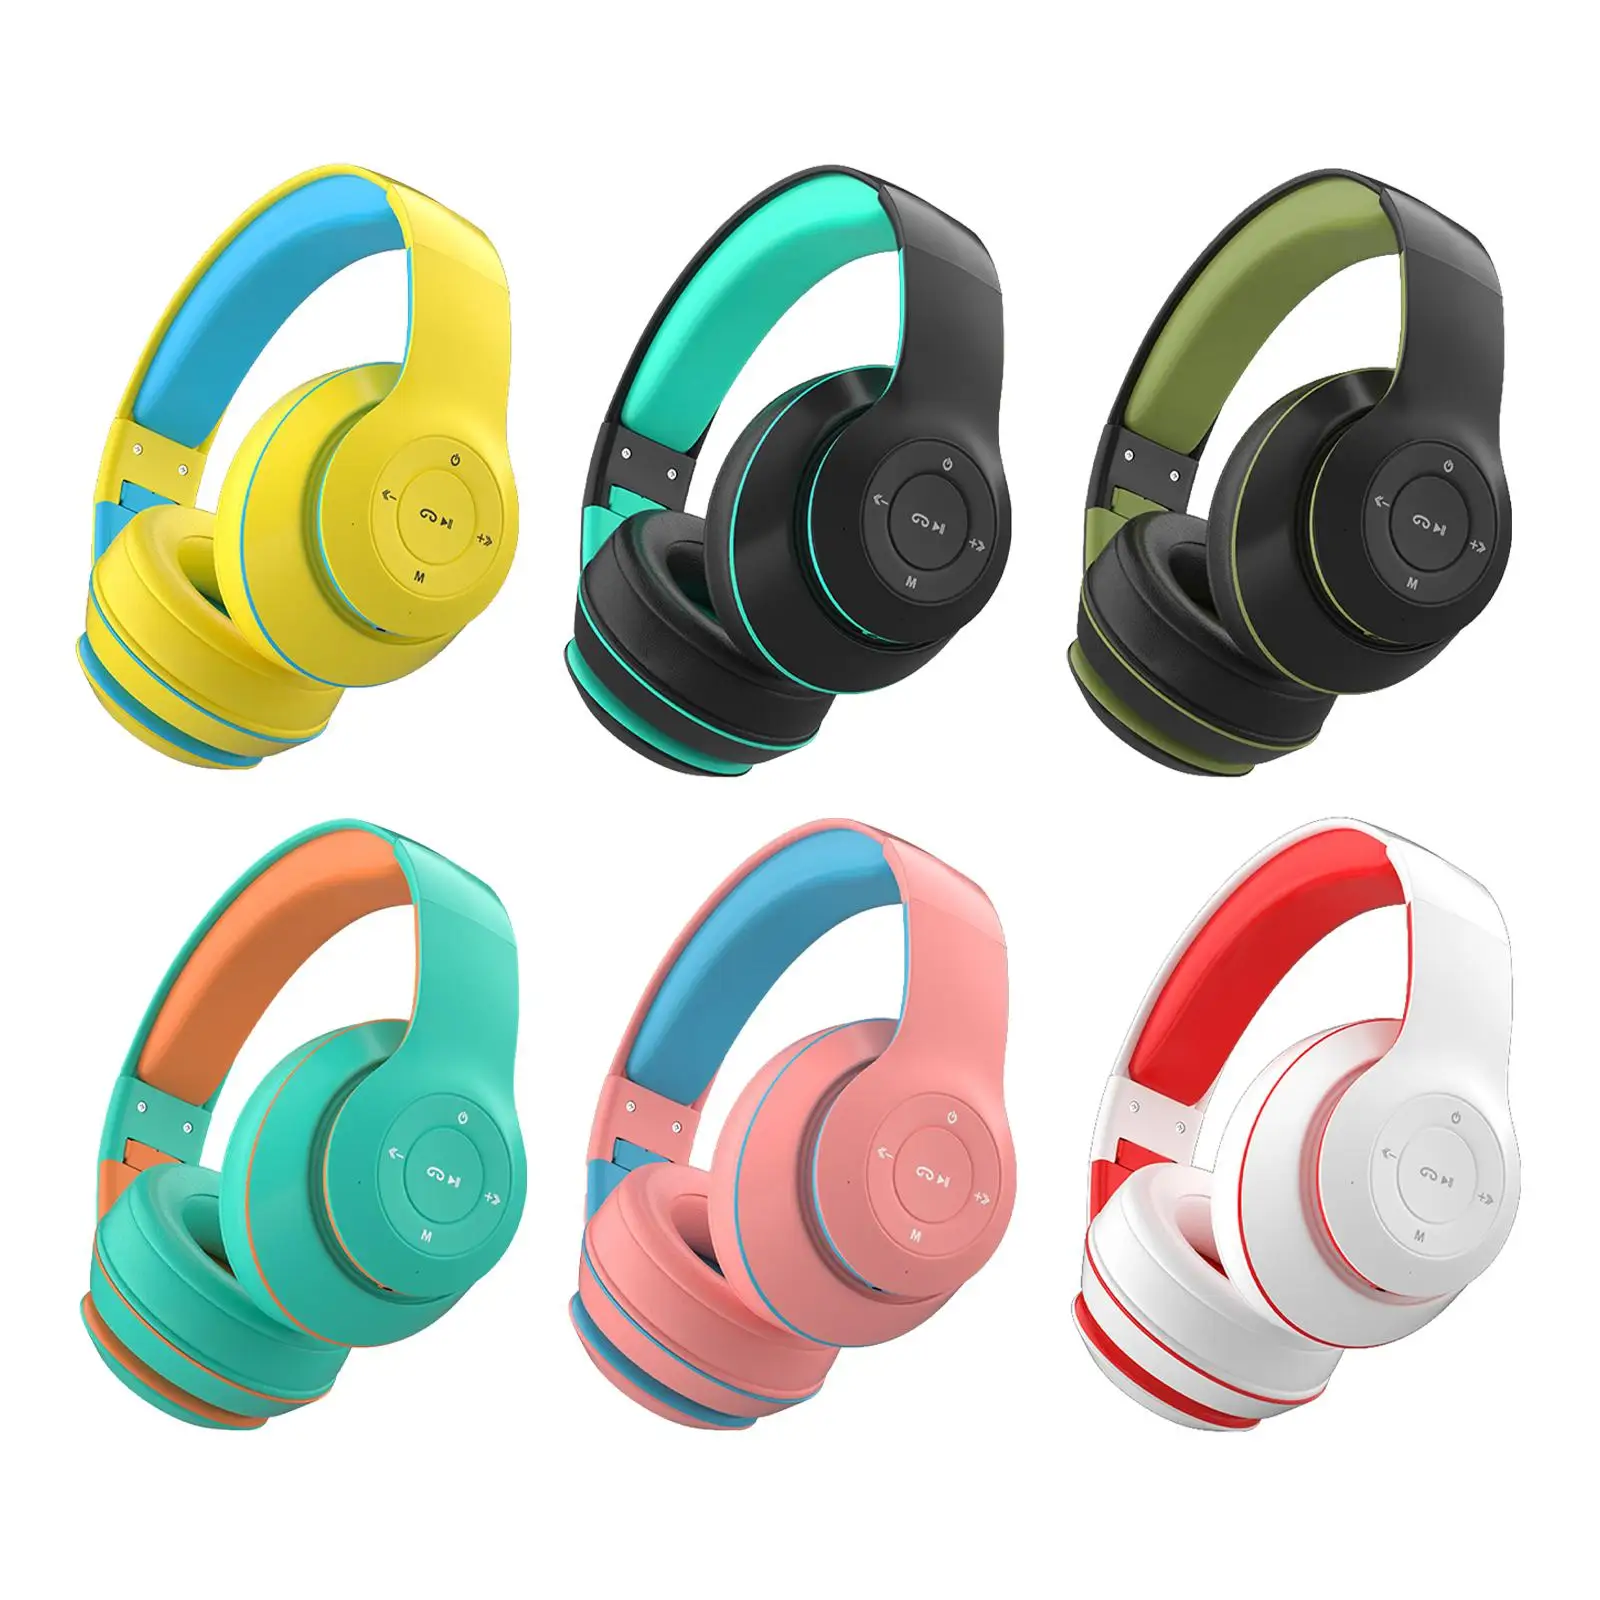 Wireless Headset Surround Sound V5.1 Foldable for Cellphone